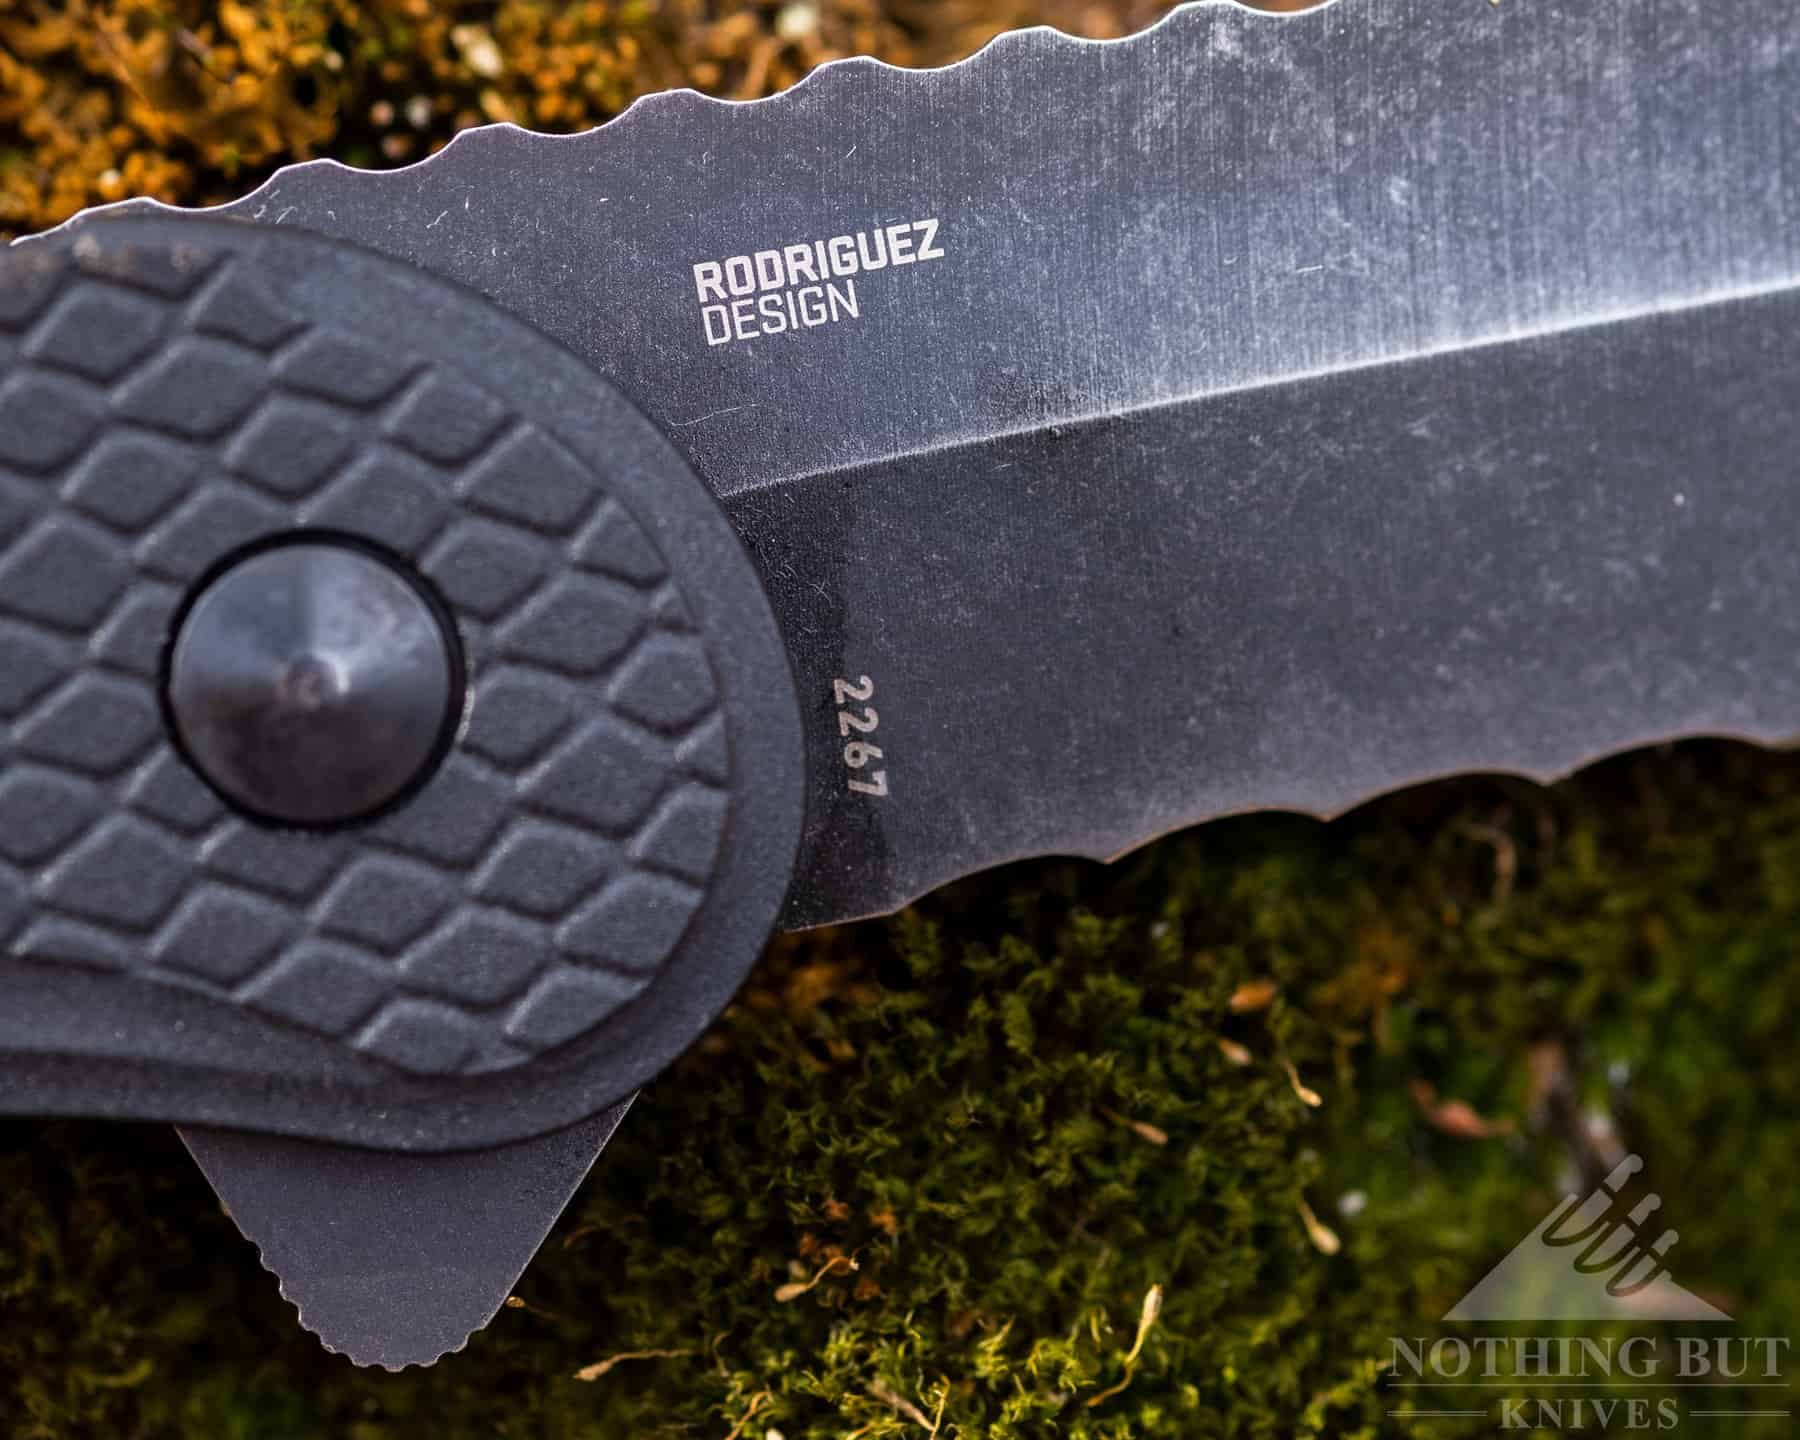 Antonio Rodriguez is the newest knife designer at CRKT.